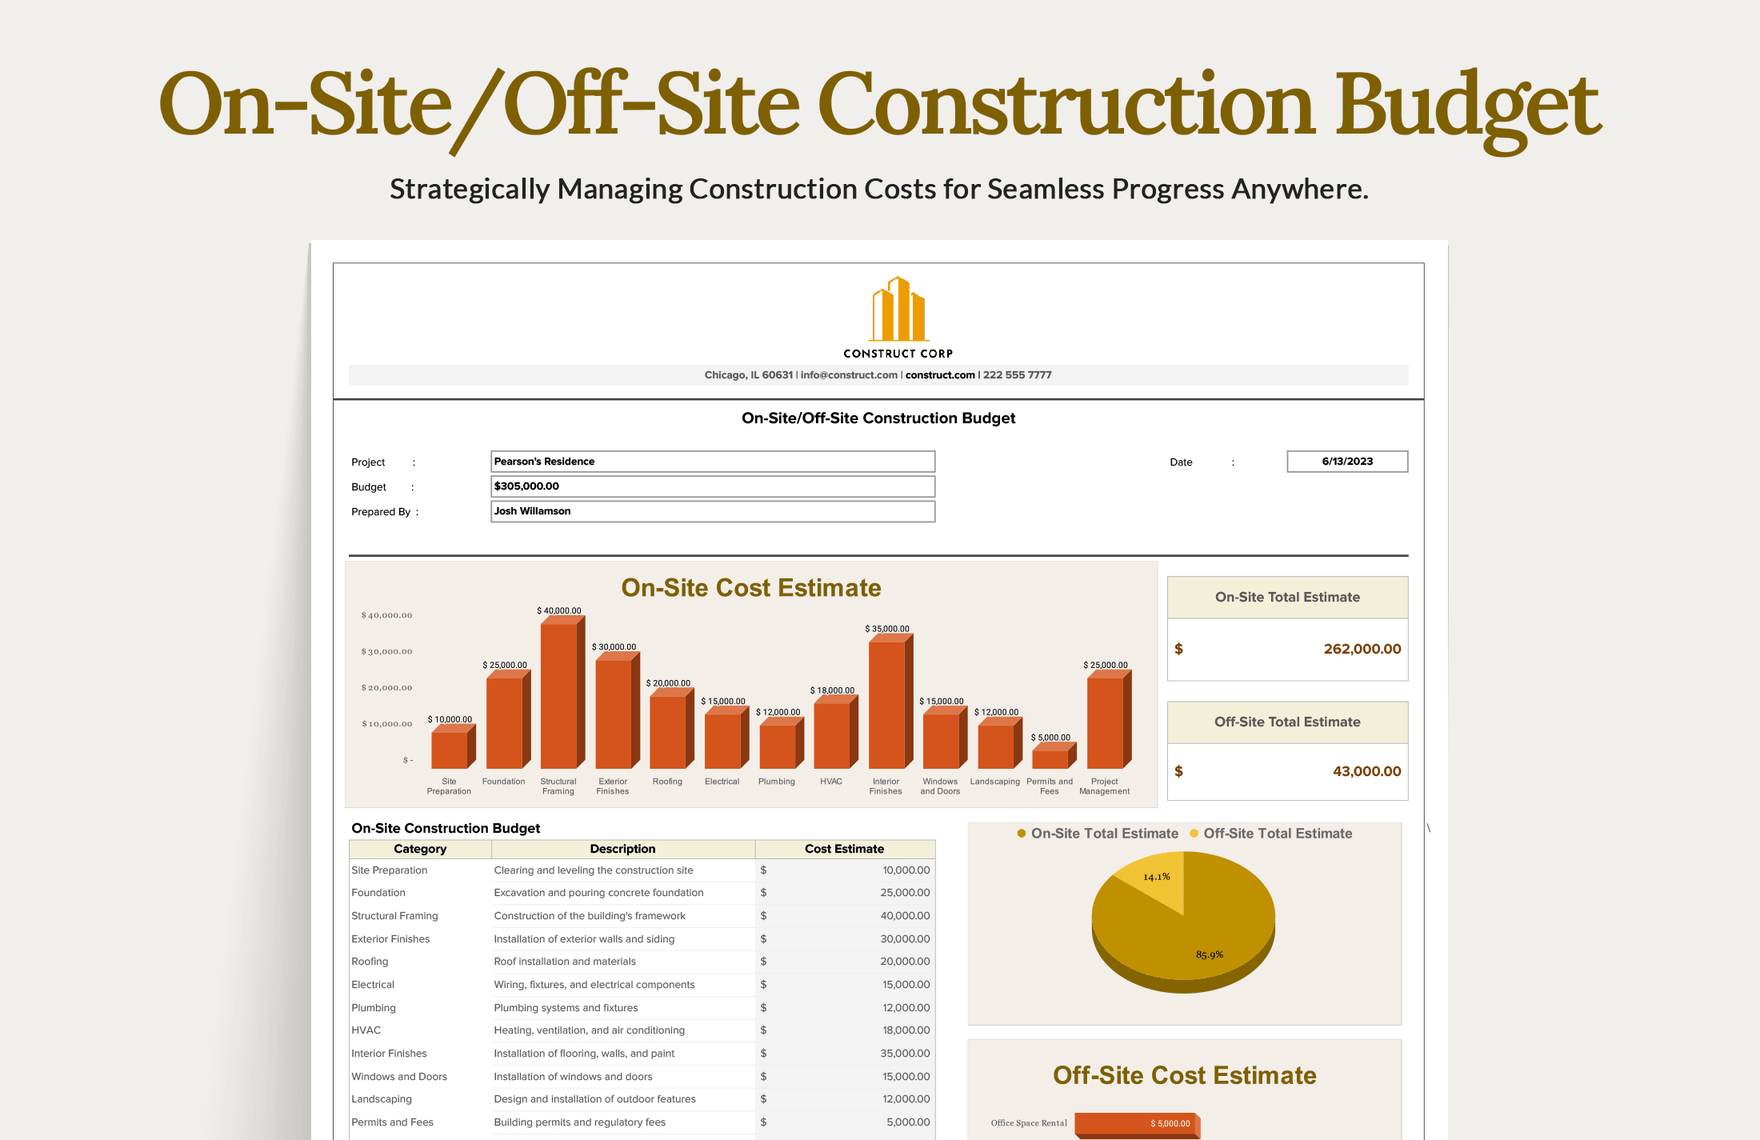 On-Site/Off-Site Construction Budget